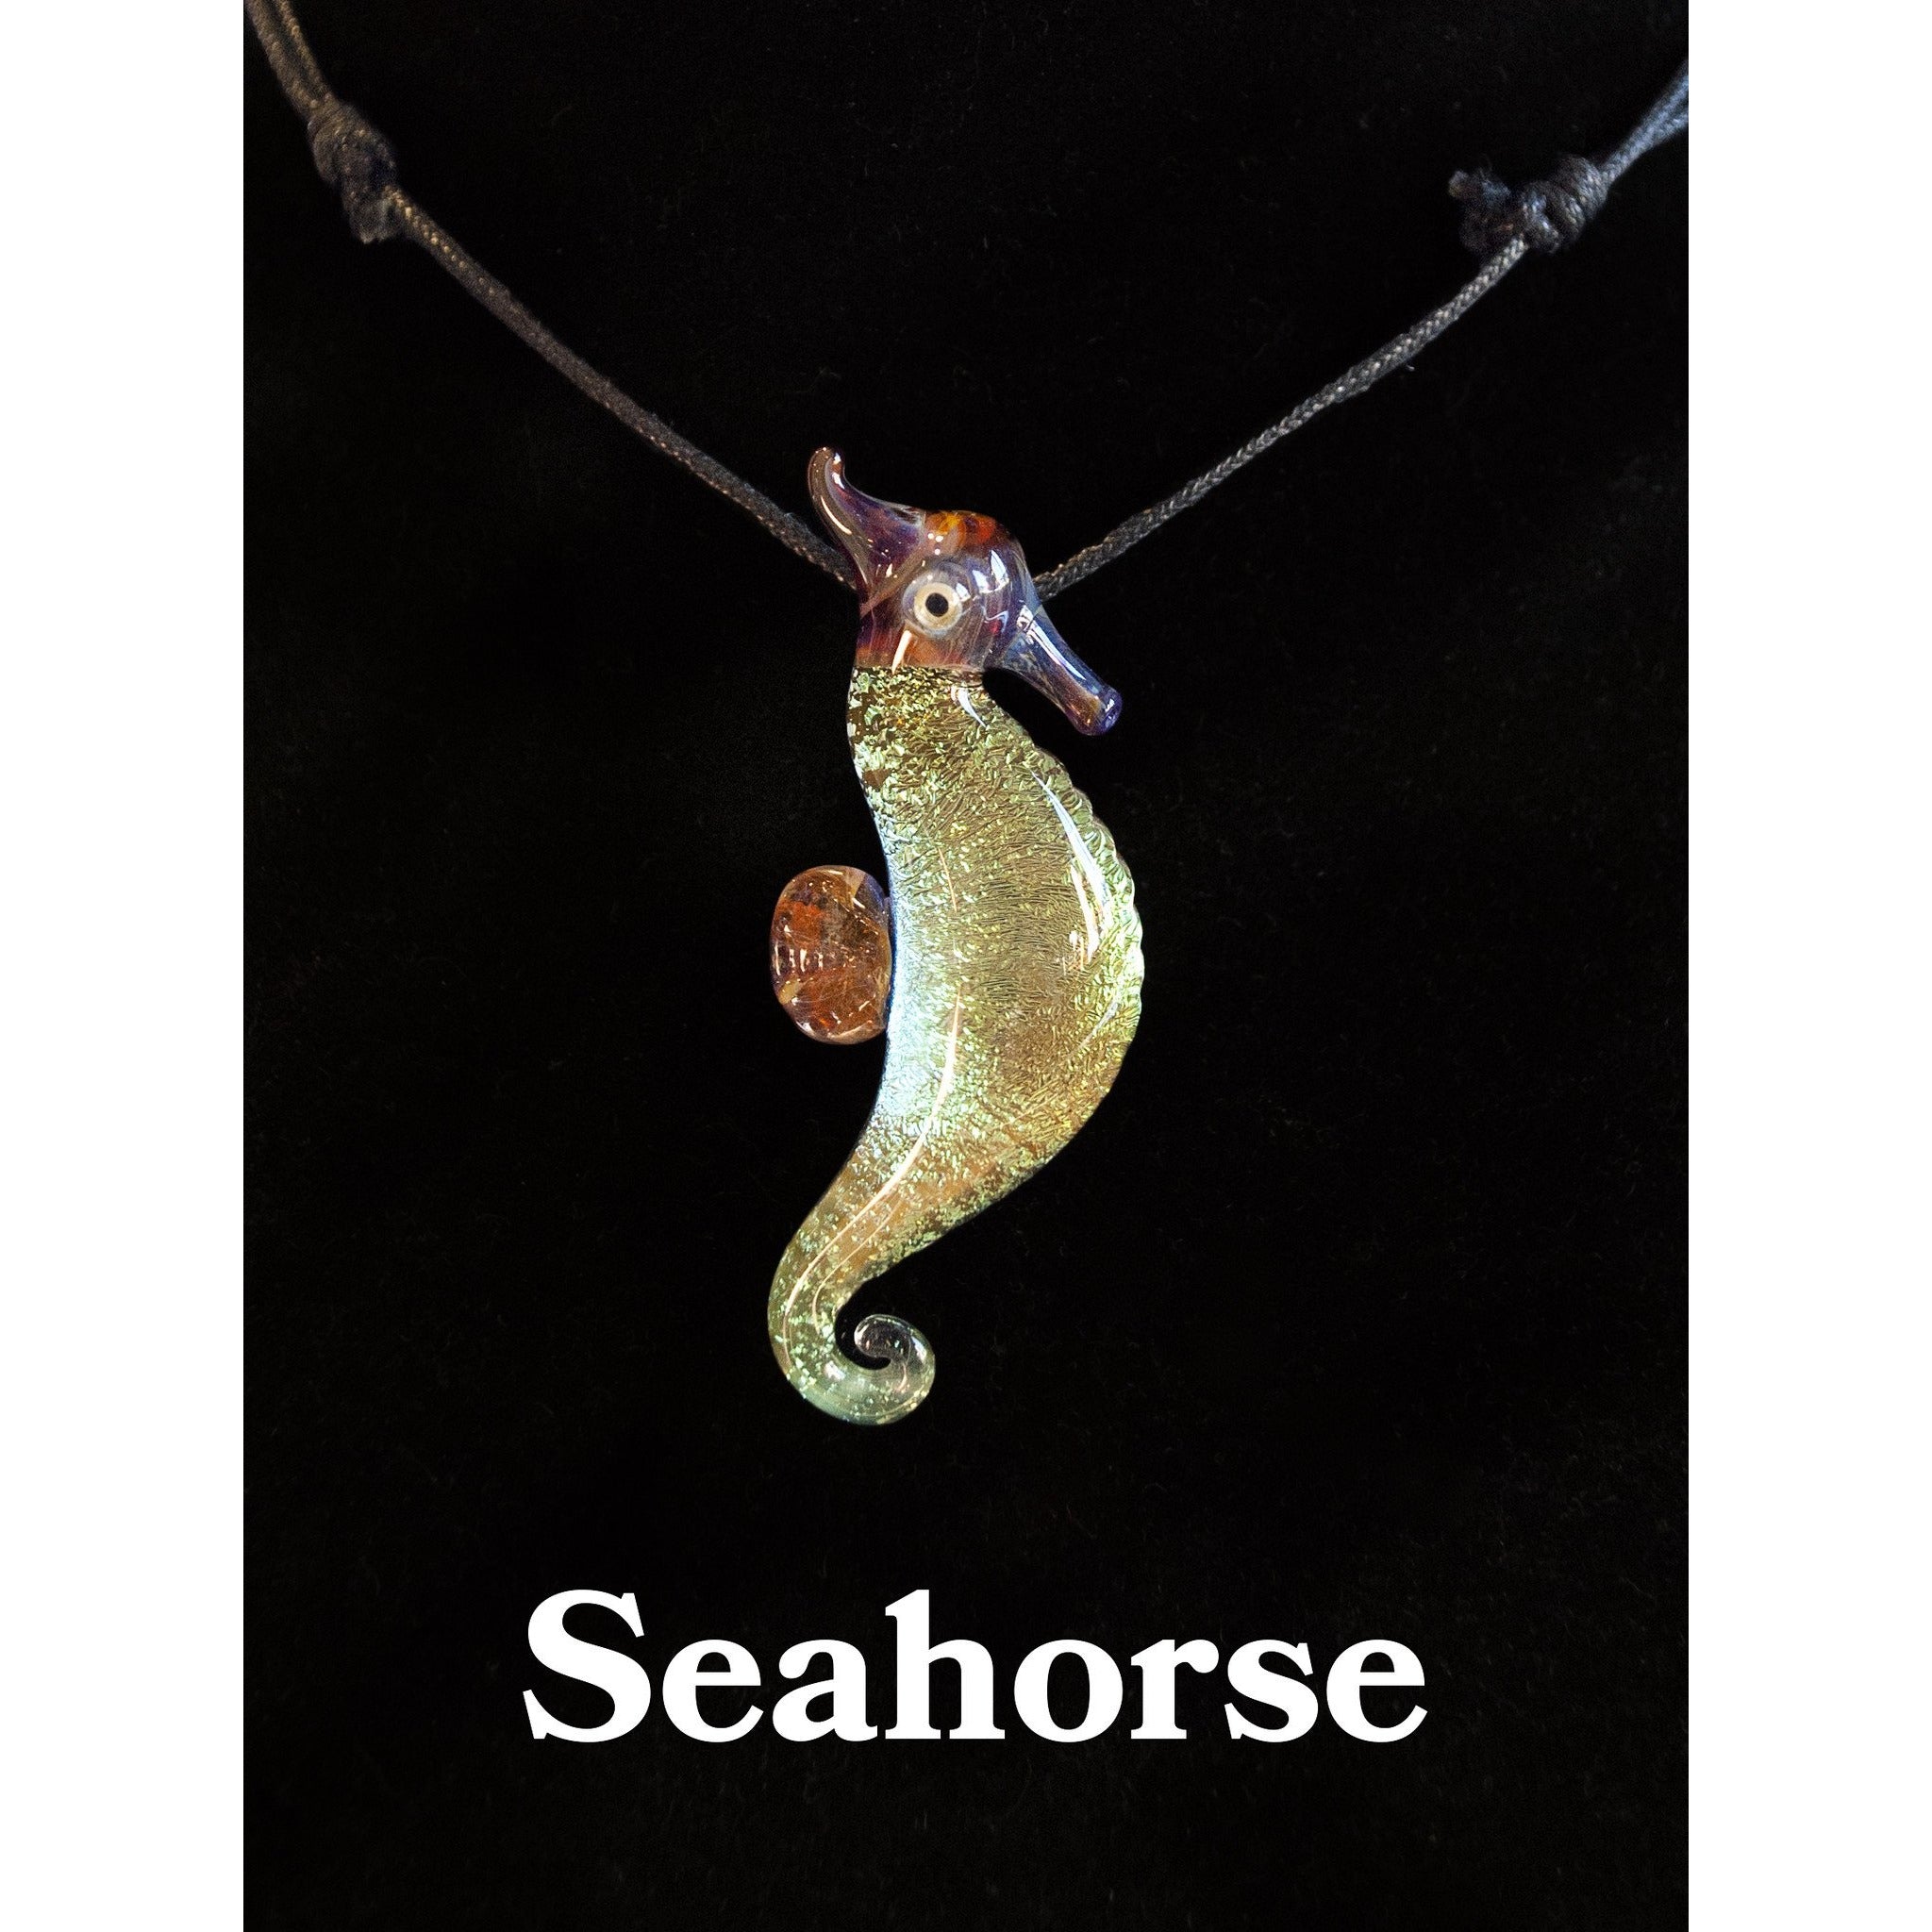 Seahorse Glass Necklace - Cali Kind Clothing Co. 